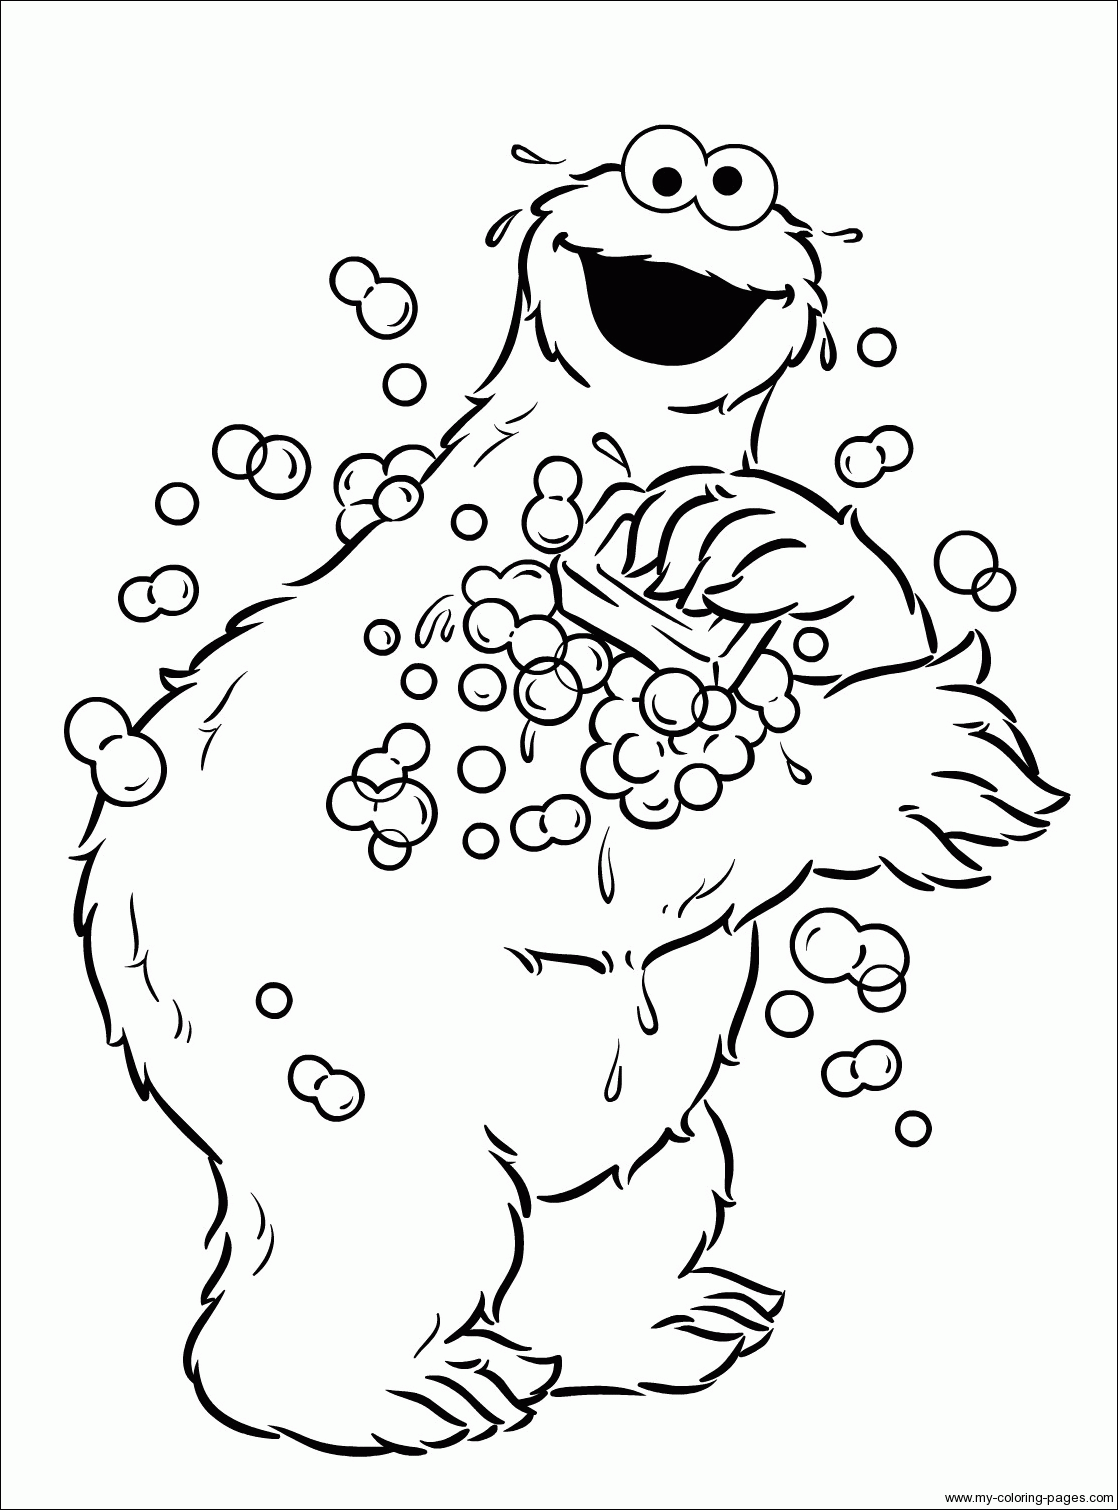 Cookie Monster Coloring Pages To Print - High Quality Coloring Pages